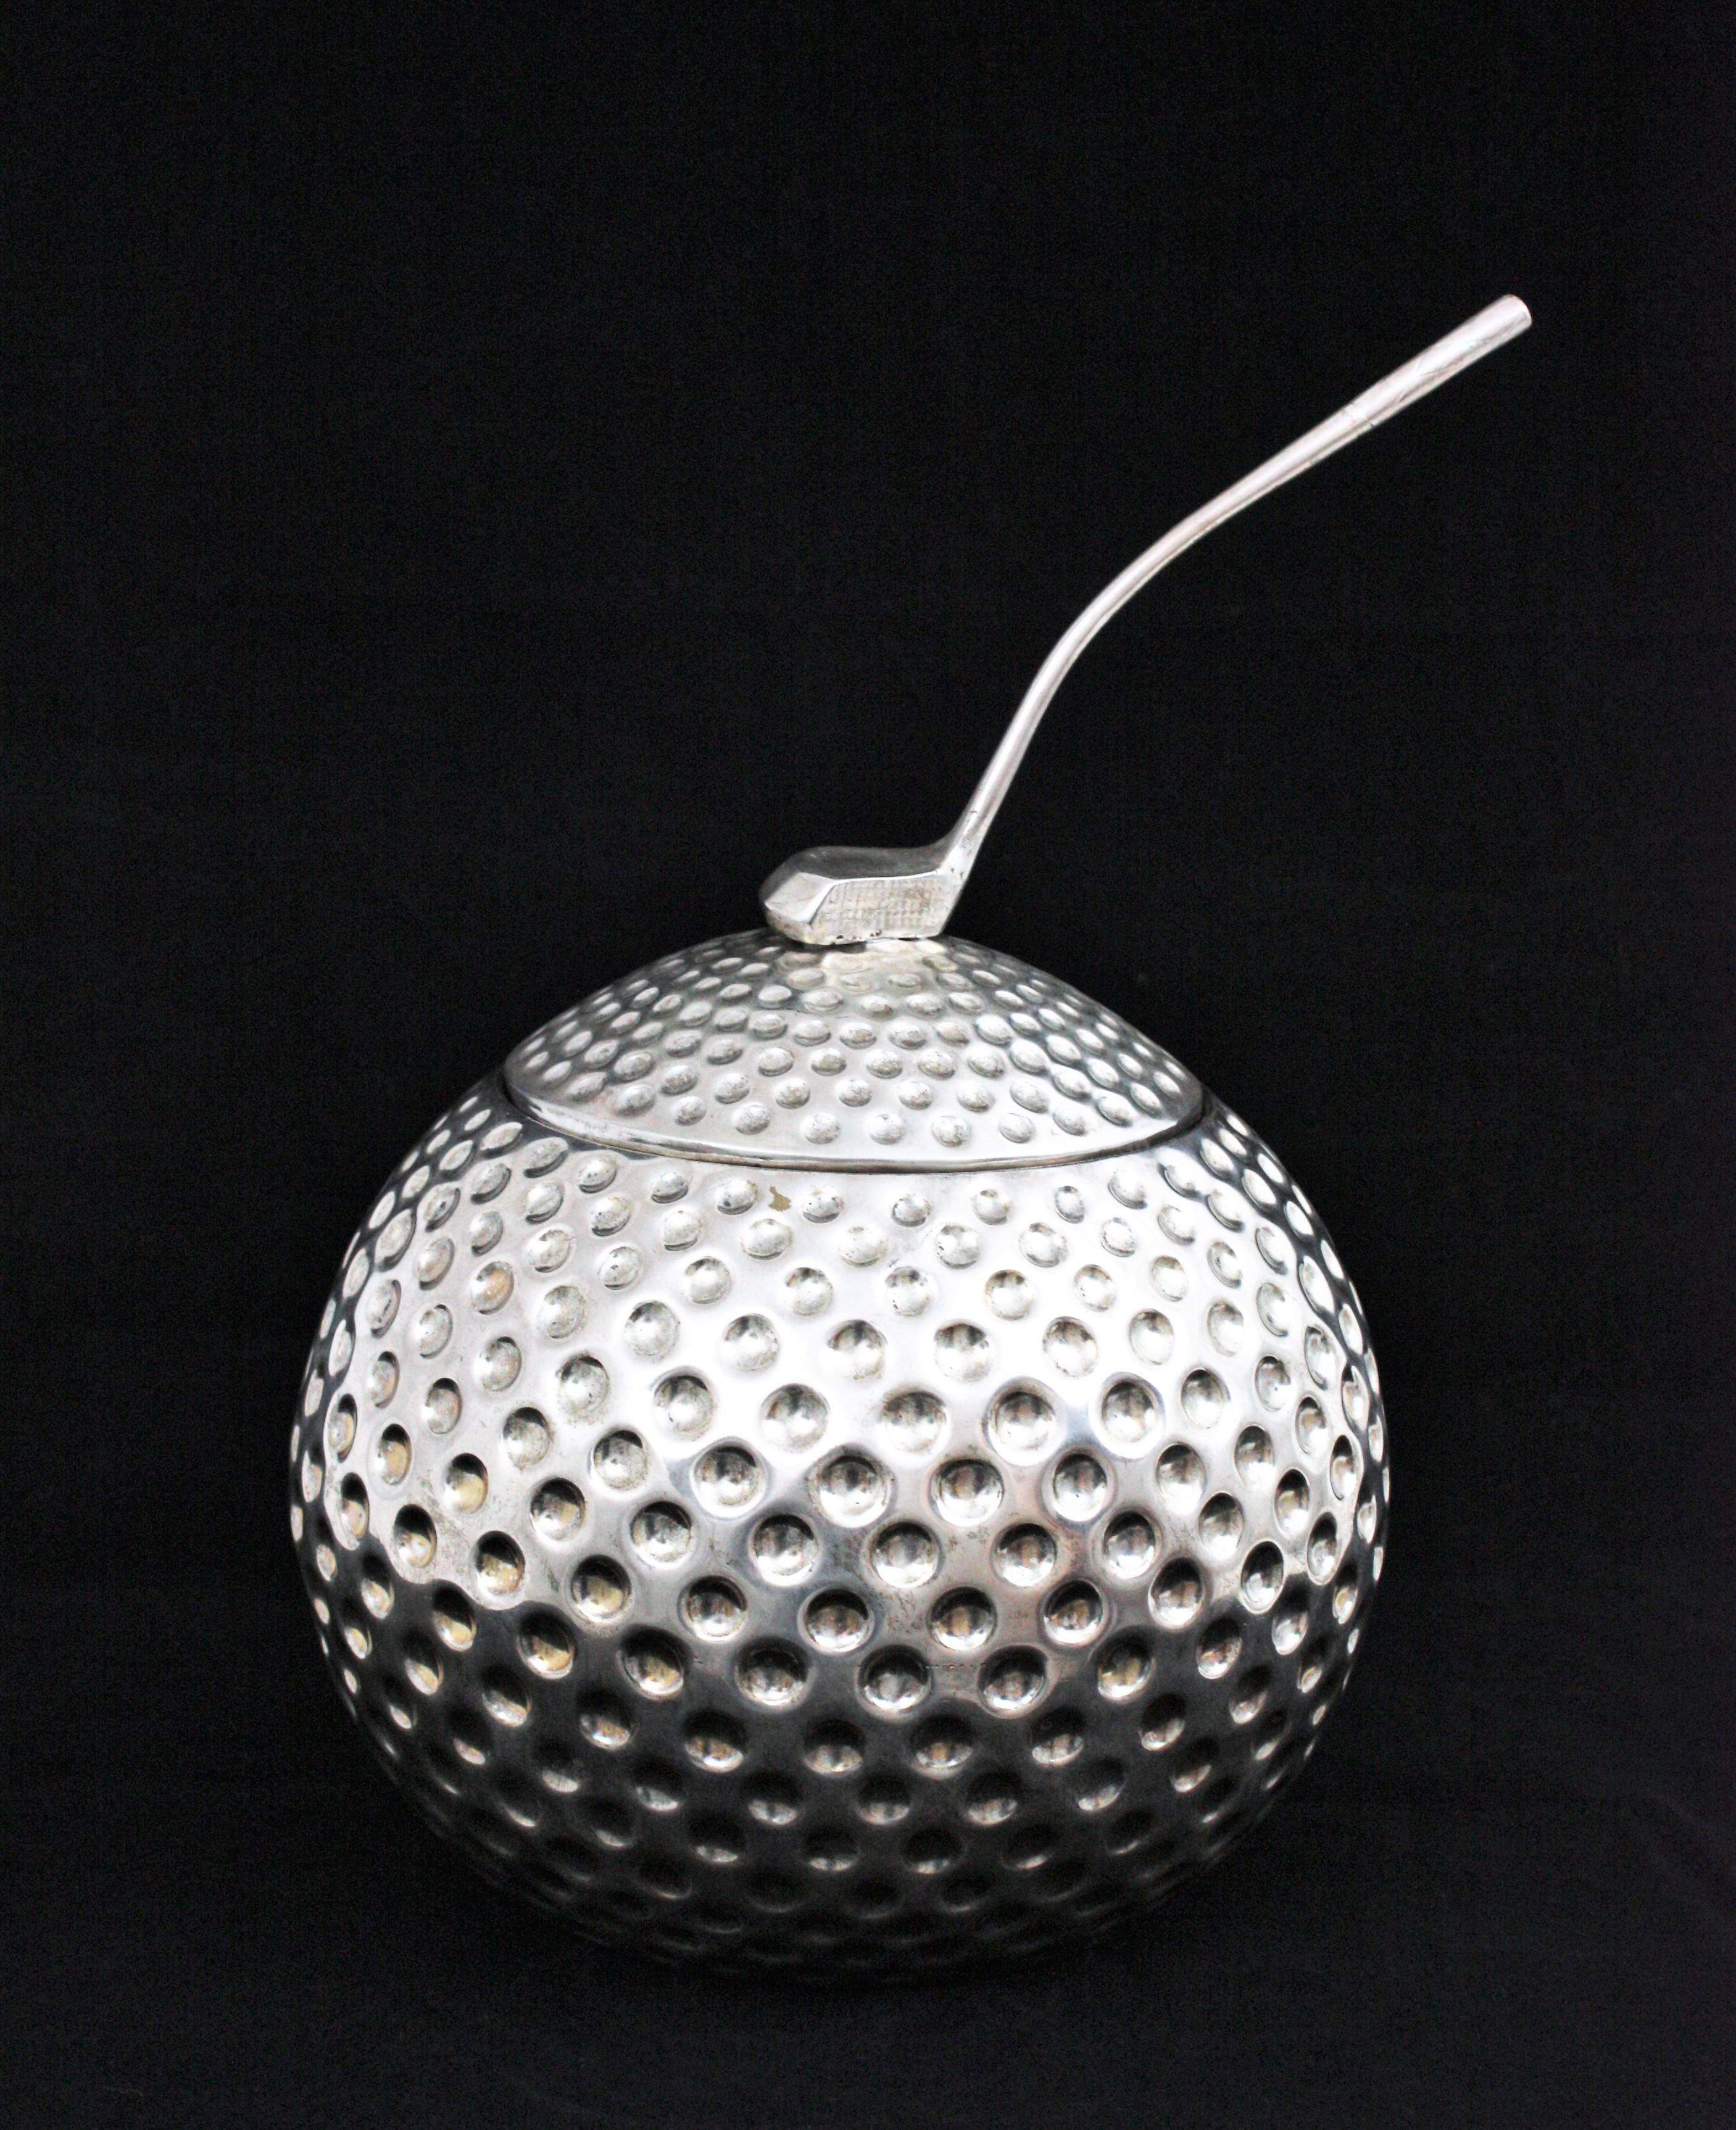 An exquisite Hollywood Regency silvered metal golf ball shaped ice bucket or wine chiller. Designed and manufactured by Valenti. Spain, 1960s.
This unusual golf ball was designed to be used as an ice bucket or wine chiller. It has a golf club on